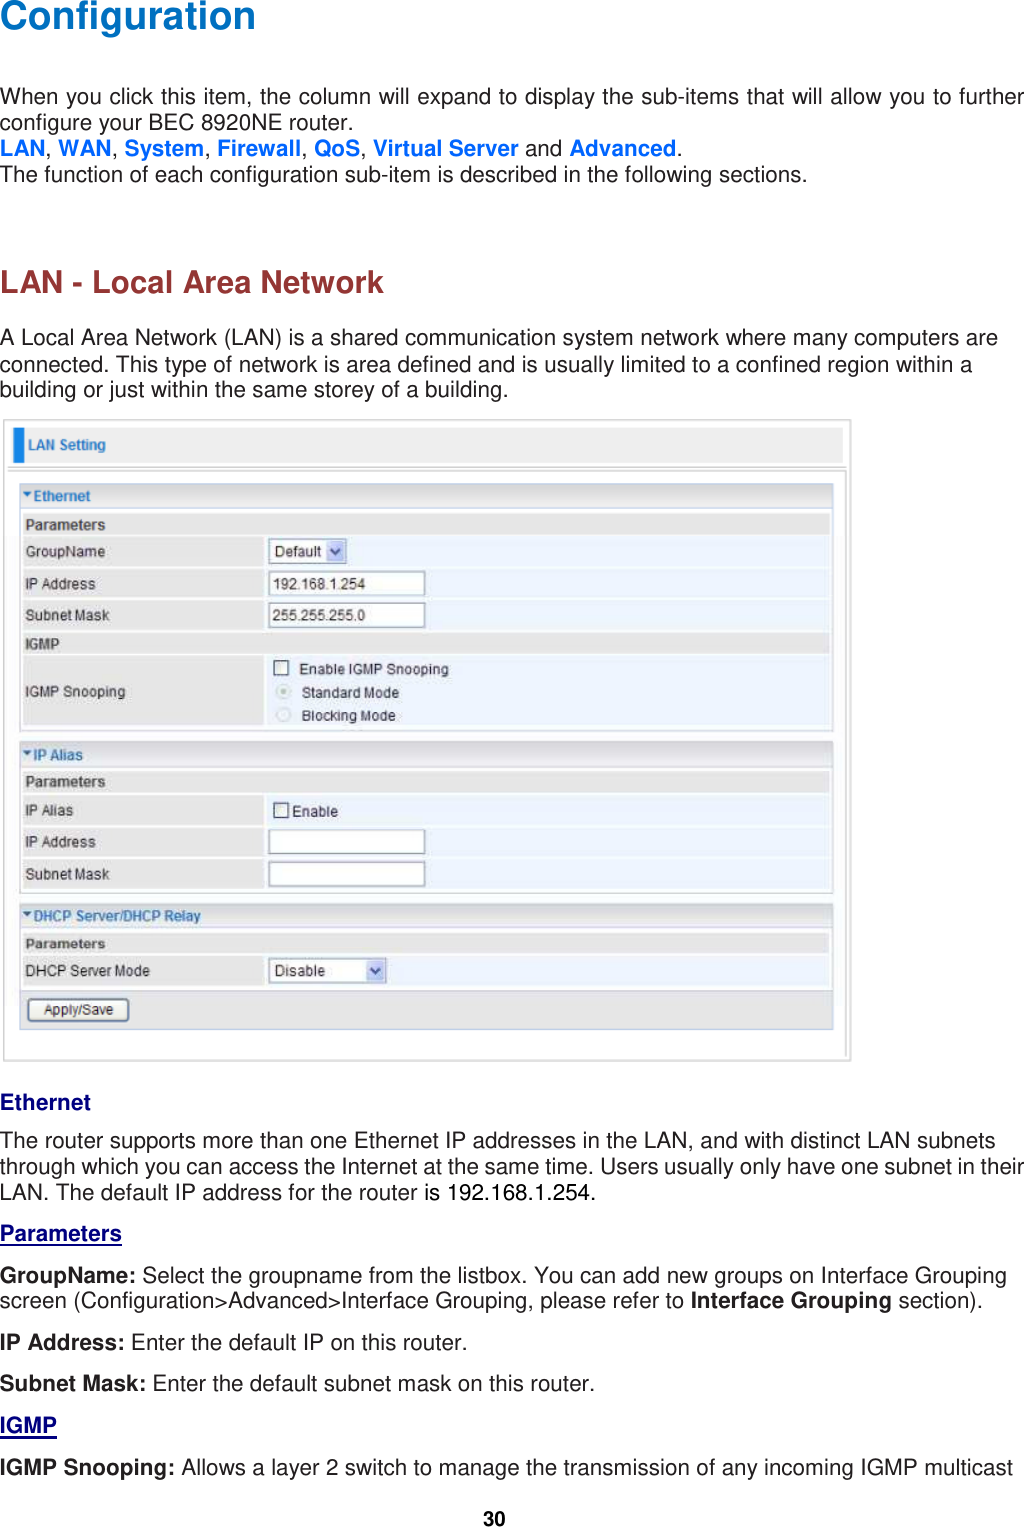  30 Configuration When you click this item, the column will expand to display the sub-items that will allow you to further configure your BEC 8920NE router. LAN, WAN, System, Firewall, QoS, Virtual Server and Advanced. The function of each configuration sub-item is described in the following sections.    LAN - Local Area Network A Local Area Network (LAN) is a shared communication system network where many computers are connected. This type of network is area defined and is usually limited to a confined region within a building or just within the same storey of a building.   Ethernet The router supports more than one Ethernet IP addresses in the LAN, and with distinct LAN subnets through which you can access the Internet at the same time. Users usually only have one subnet in their LAN. The default IP address for the router is 192.168.1.254.  Parameters GroupName: Select the groupname from the listbox. You can add new groups on Interface Grouping screen (Configuration&gt;Advanced&gt;Interface Grouping, please refer to Interface Grouping section).  IP Address: Enter the default IP on this router. Subnet Mask: Enter the default subnet mask on this router. IGMP IGMP Snooping: Allows a layer 2 switch to manage the transmission of any incoming IGMP multicast 